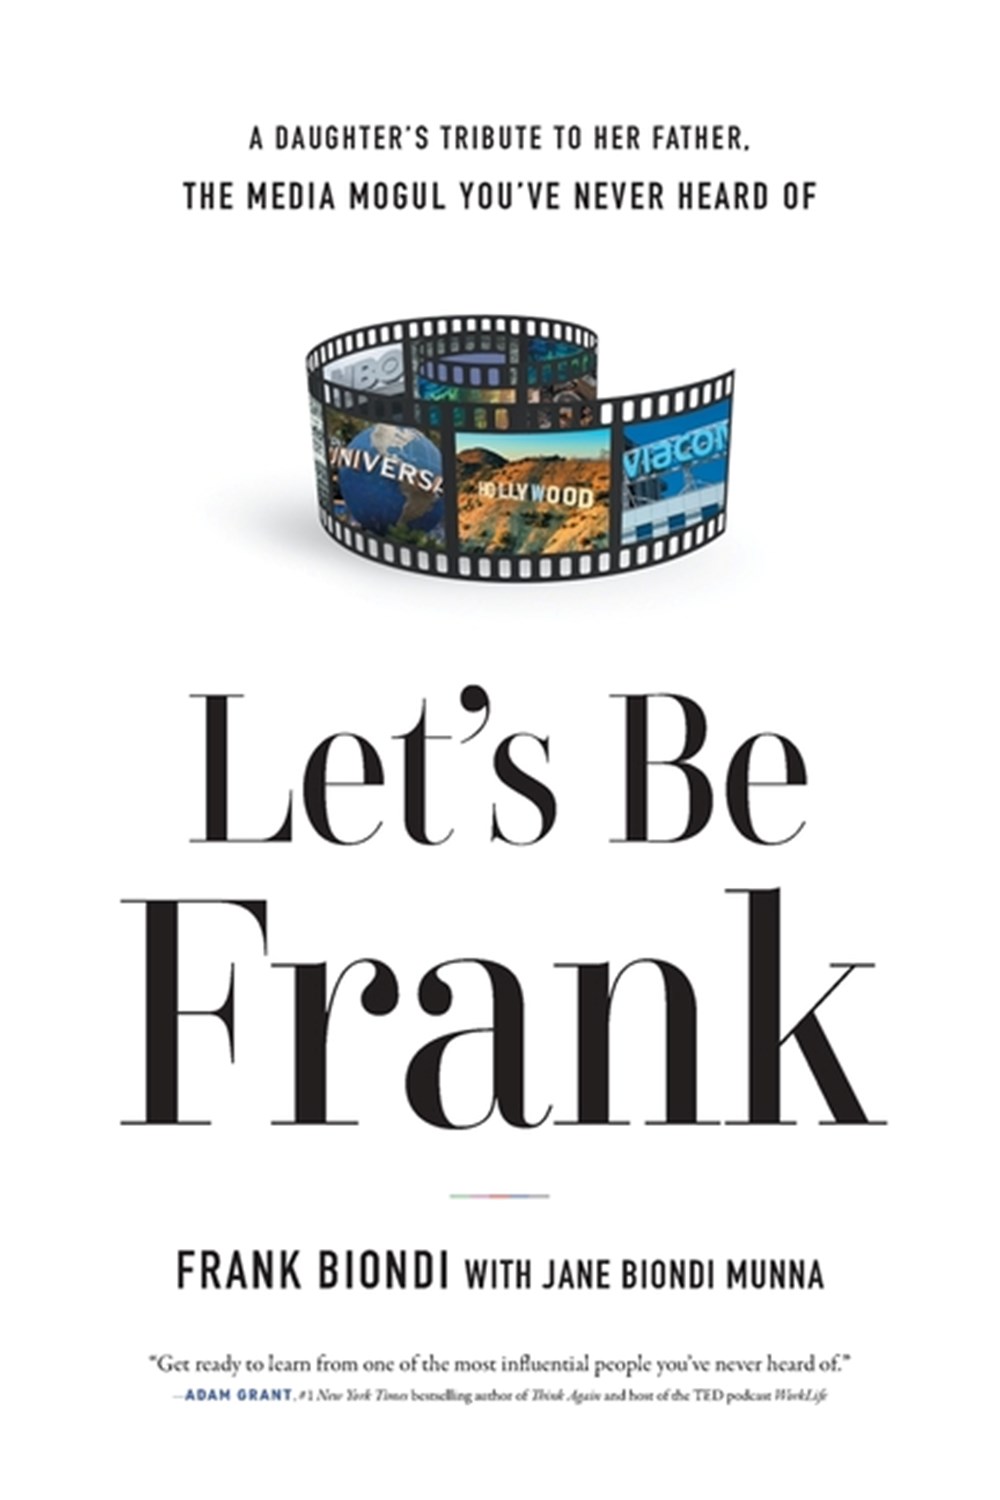 Let's Be Frank: A Daughter's Tribute to Her Father, The Media Mogul You've Never Heard of